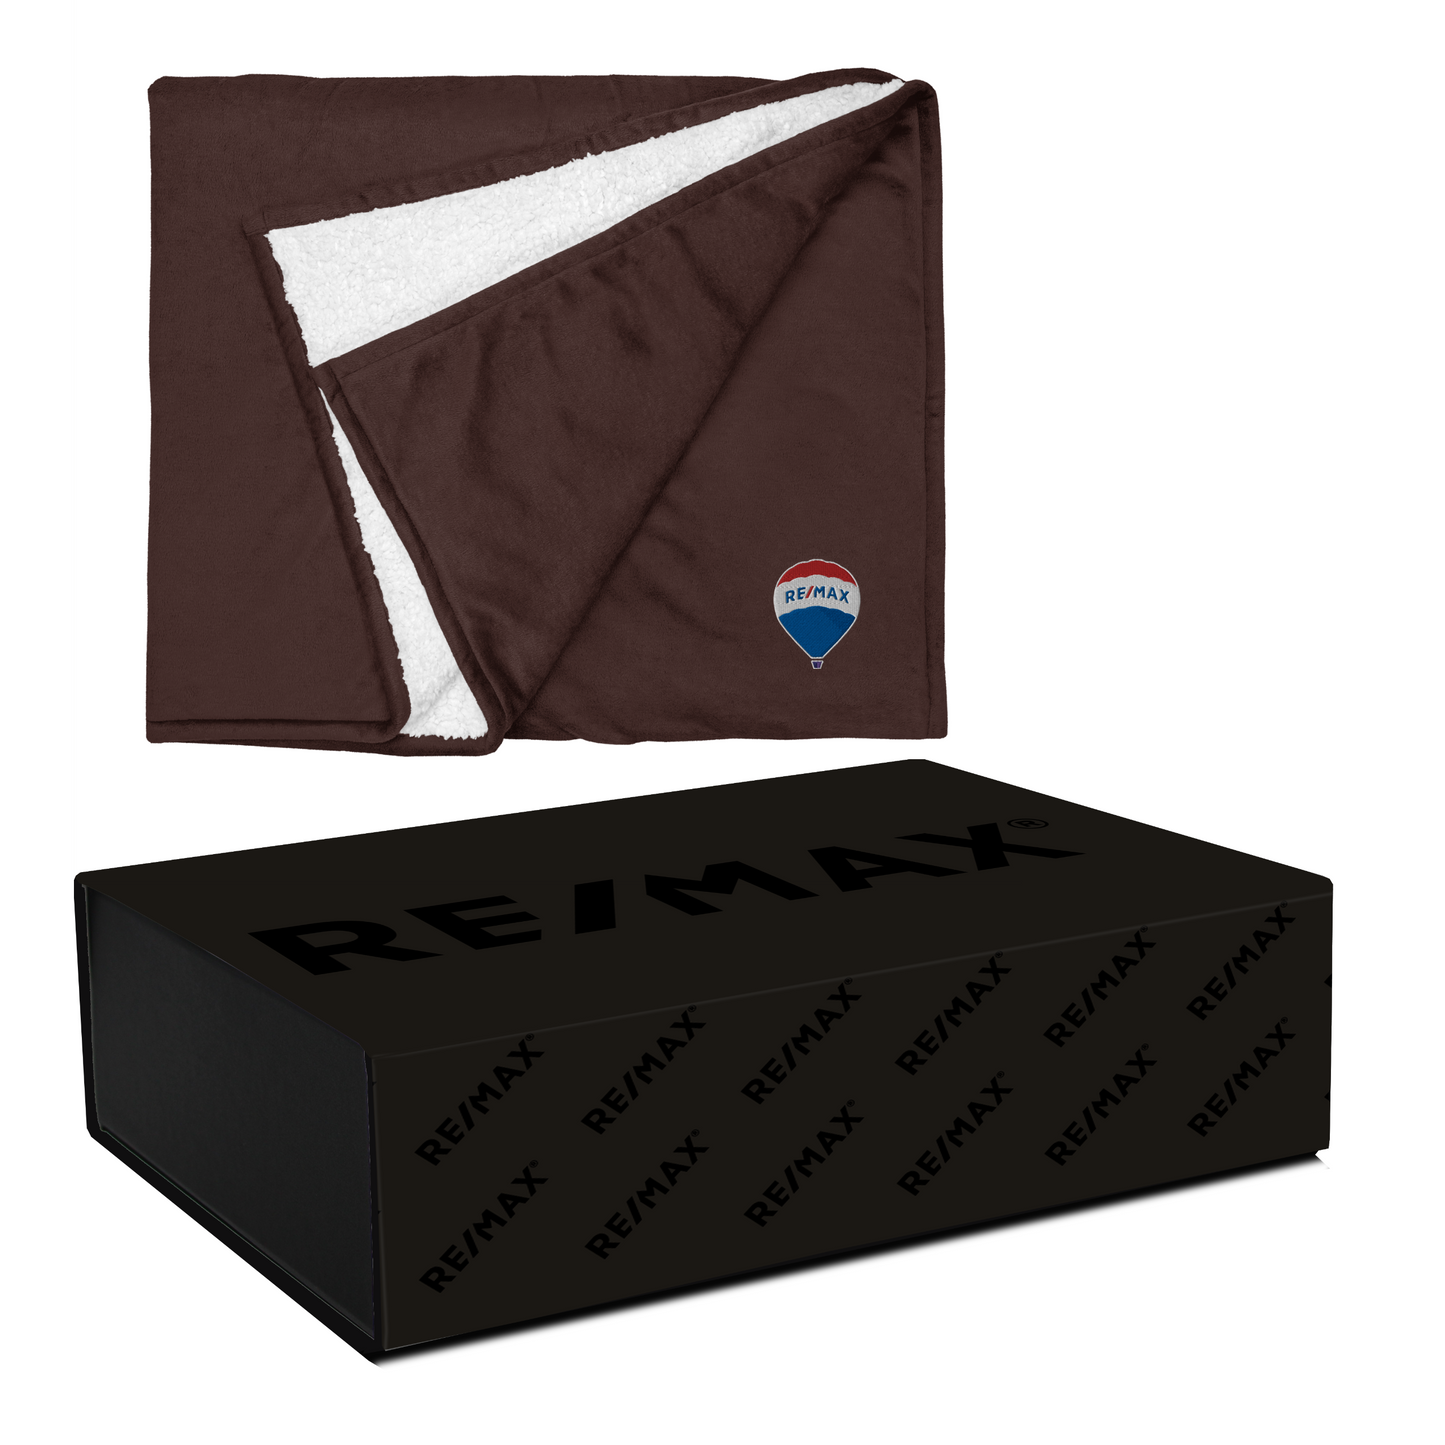 RE/MAX Branded Closing Gift Box with RE/MAX Branded Blanket